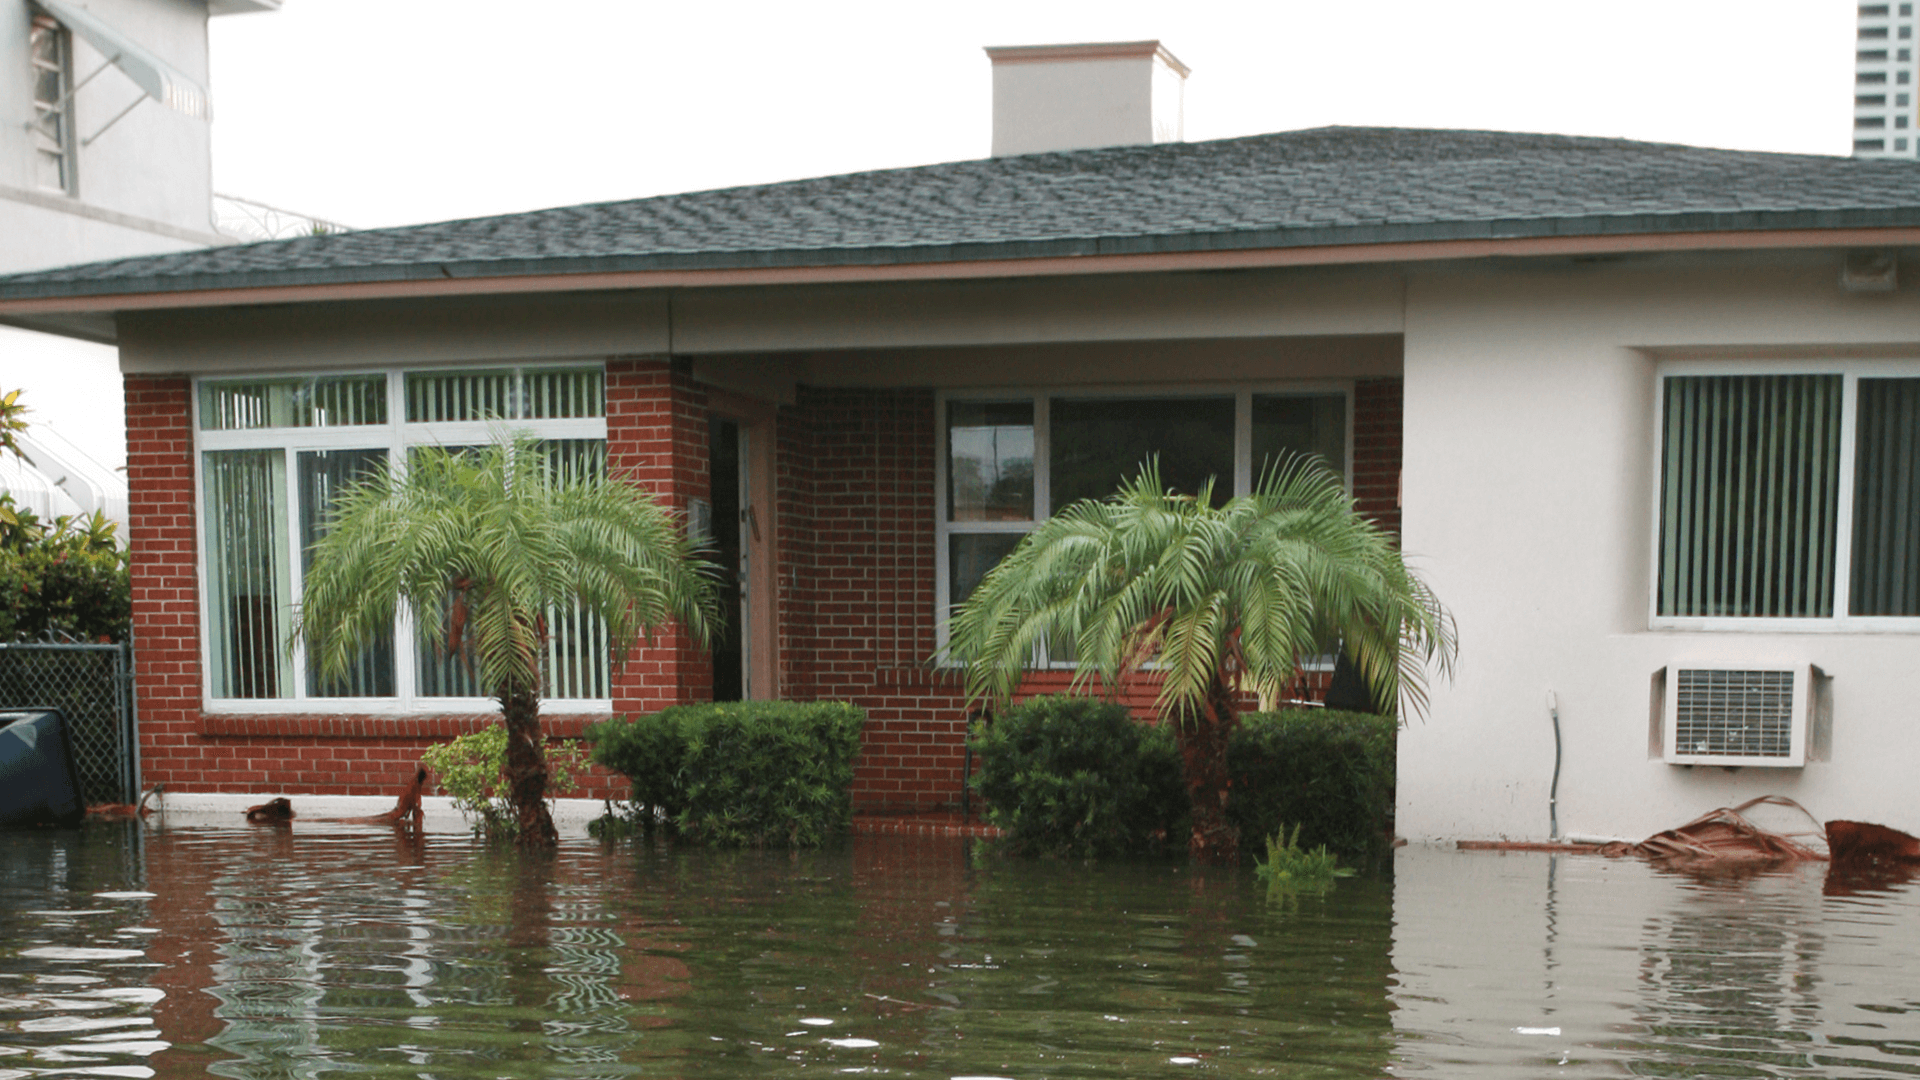 A flooded street in front of a house